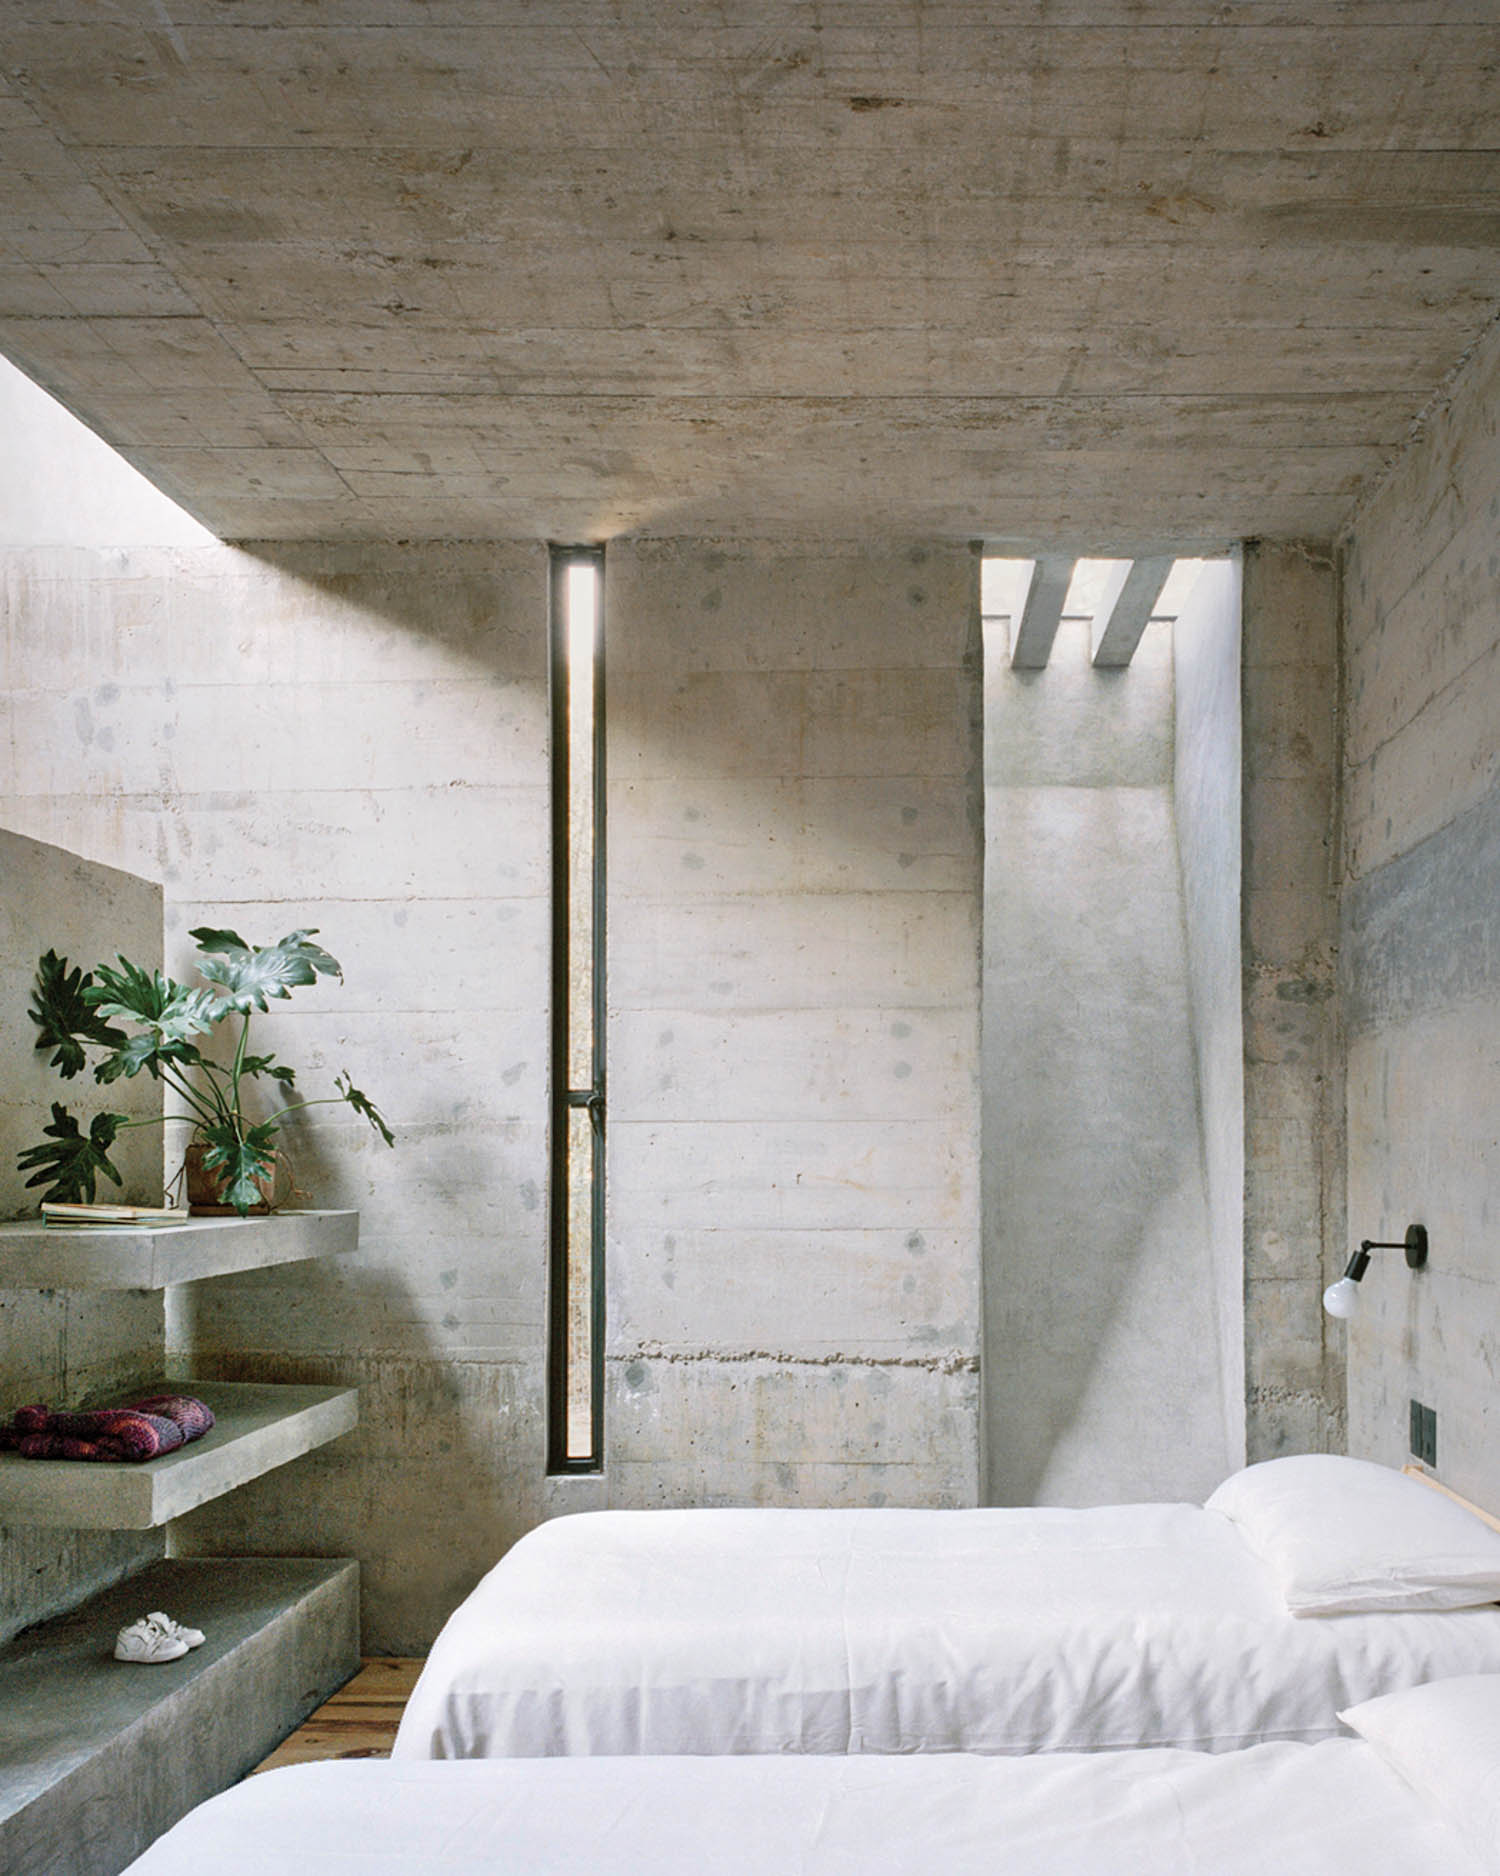 crisp white linens drape the beds inside a Brutalist bunker home, now a weekend retreat in Mexico